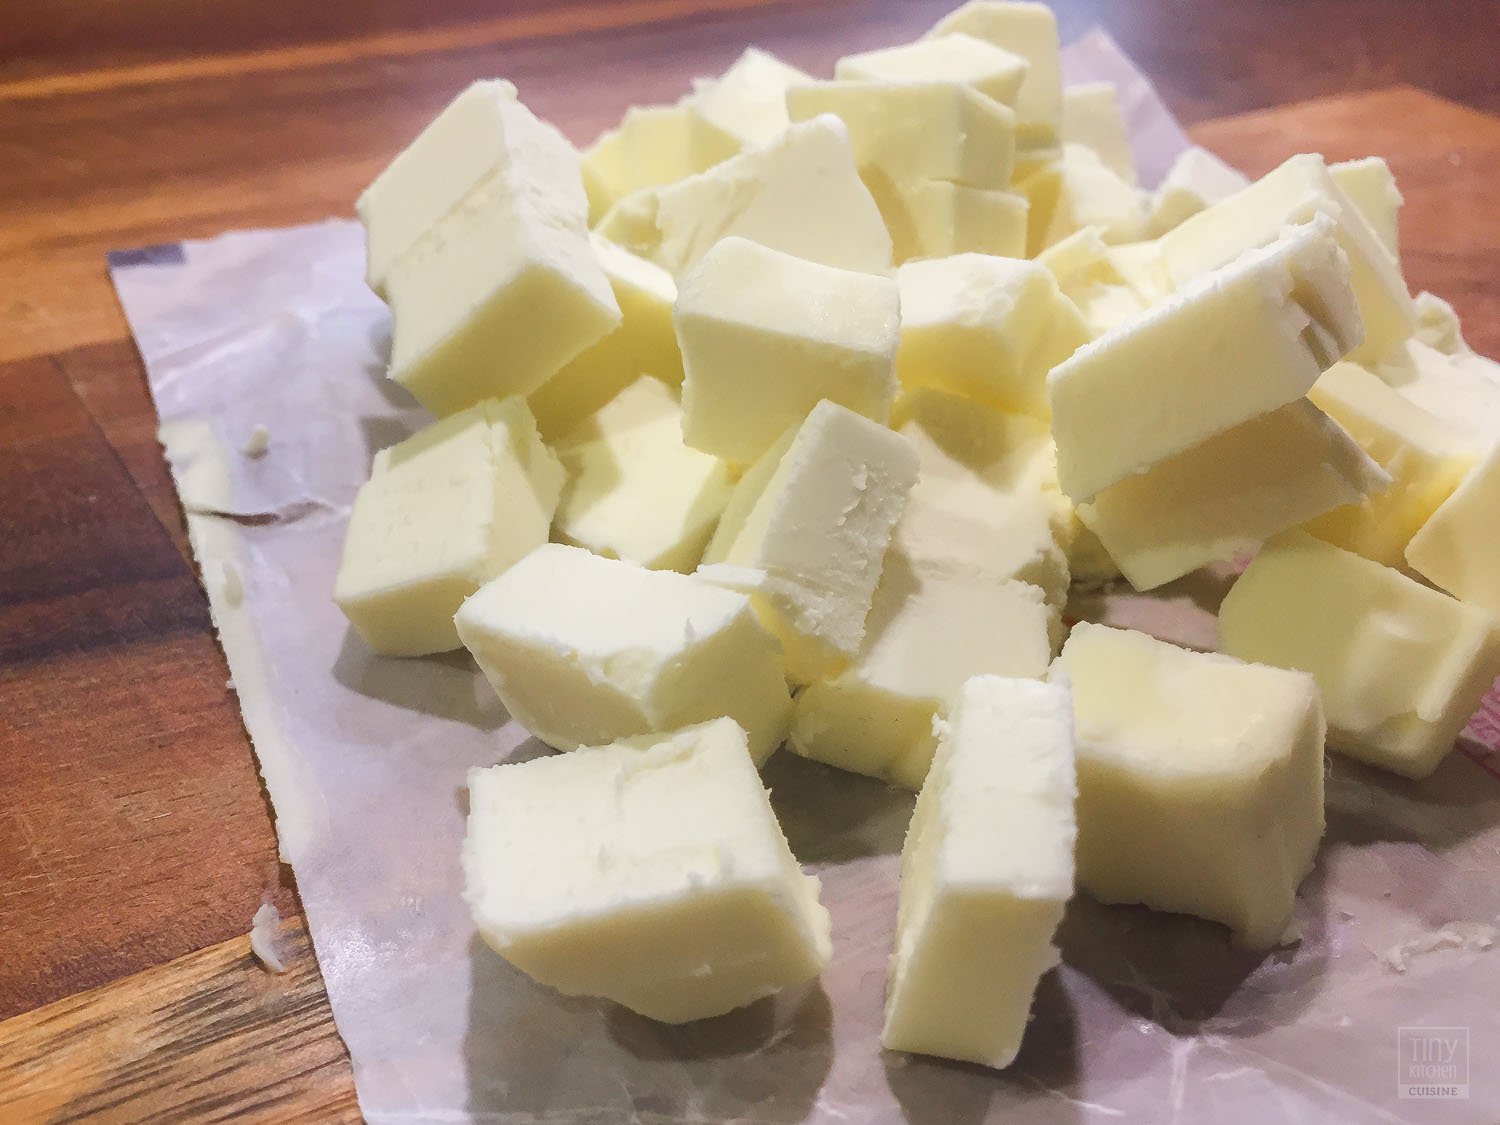 When making all-butter pie crust, cut your butter up in advance. This helps get the butter integrated without overworking it in your flour. | Tiny Kitchen Cuisine | http://tiny.kitchen/